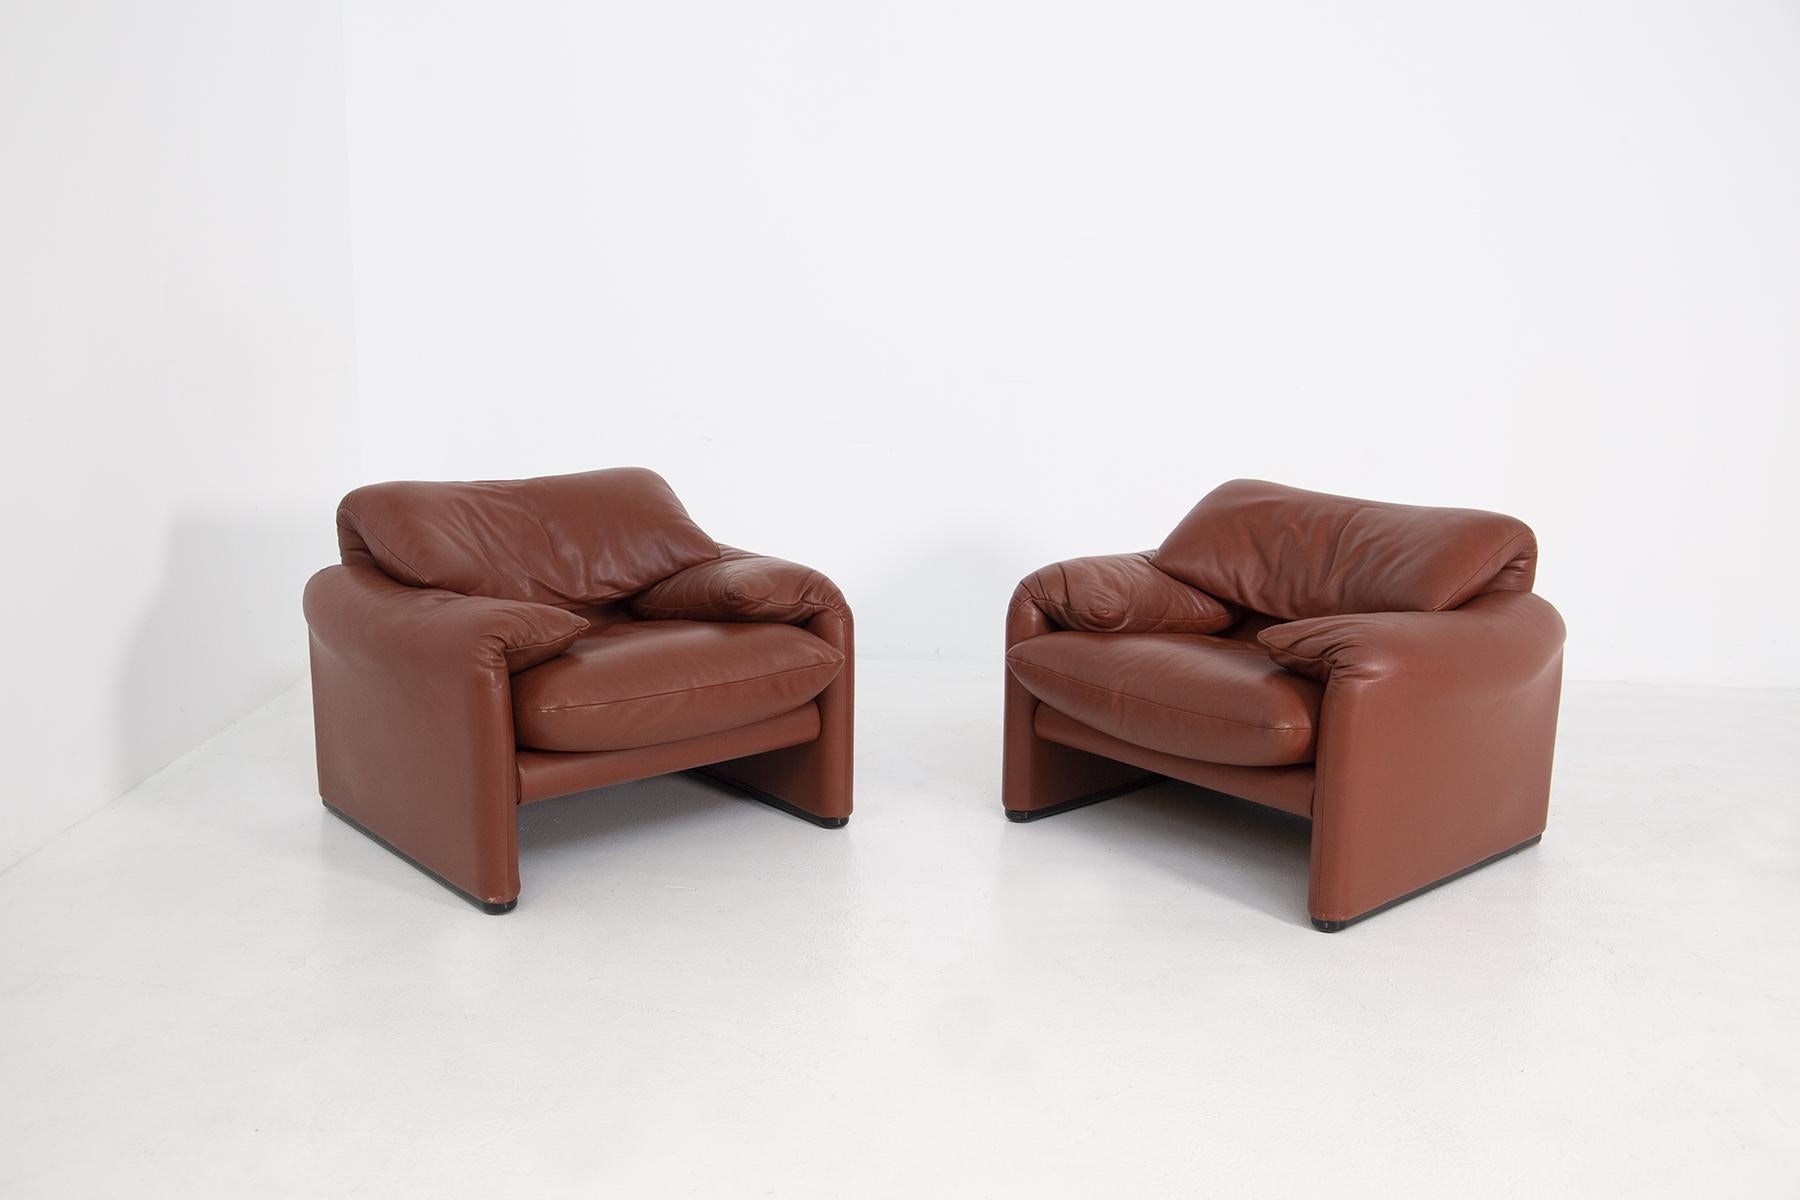 Pair of armchairs designed by Vico Magistretti for the Cassina factory in 1973. The Maralunga armchairs are upholstered entirely in bordeaux-coloured leather. With its warm and reassuring shapes, where the possibility of movement of the backrest,